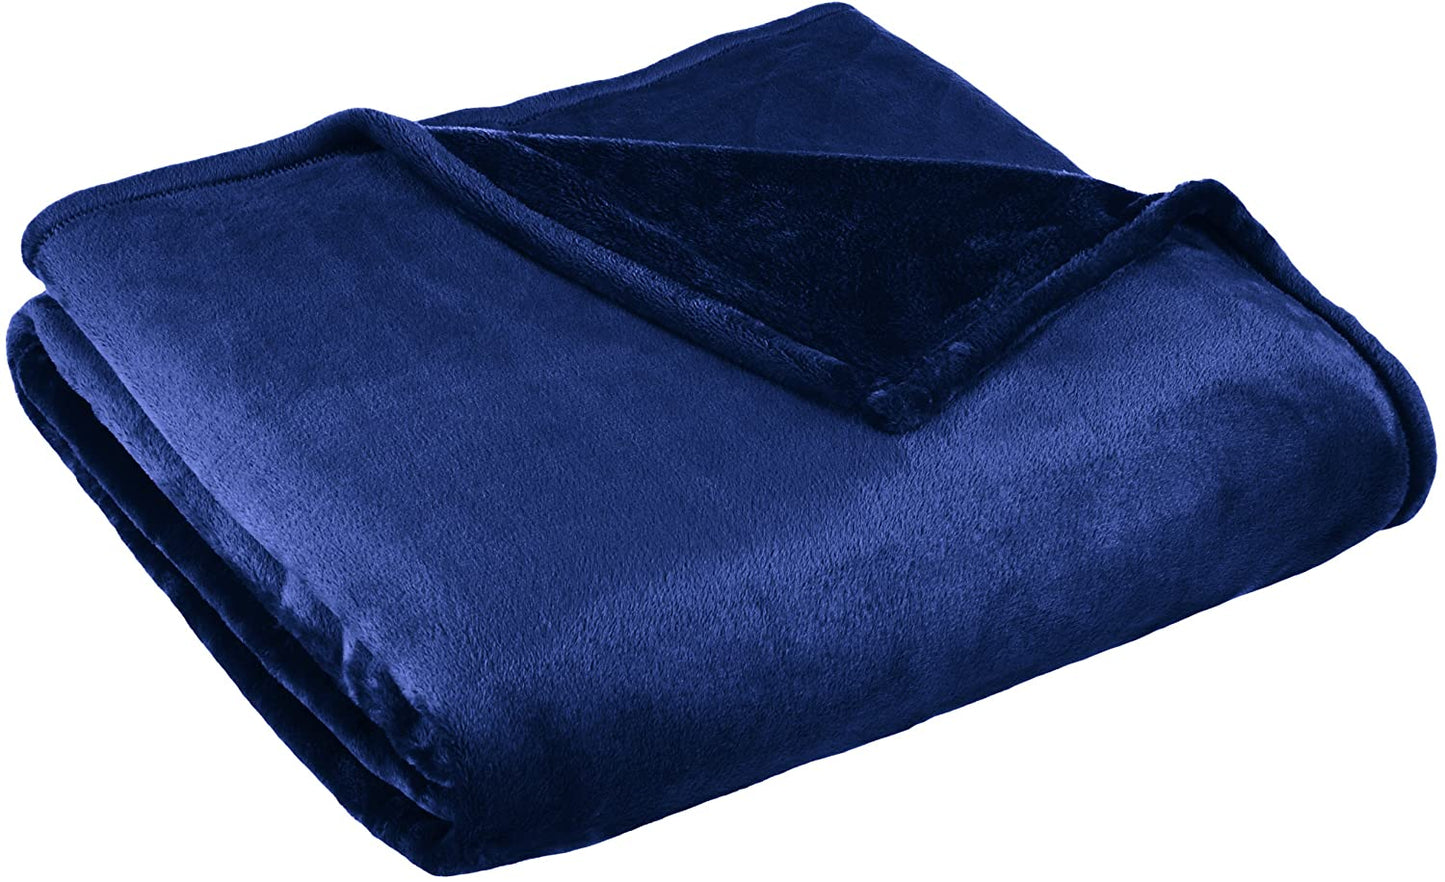 Thesis Cashmere Plush Blanket Full/Queen - Navy